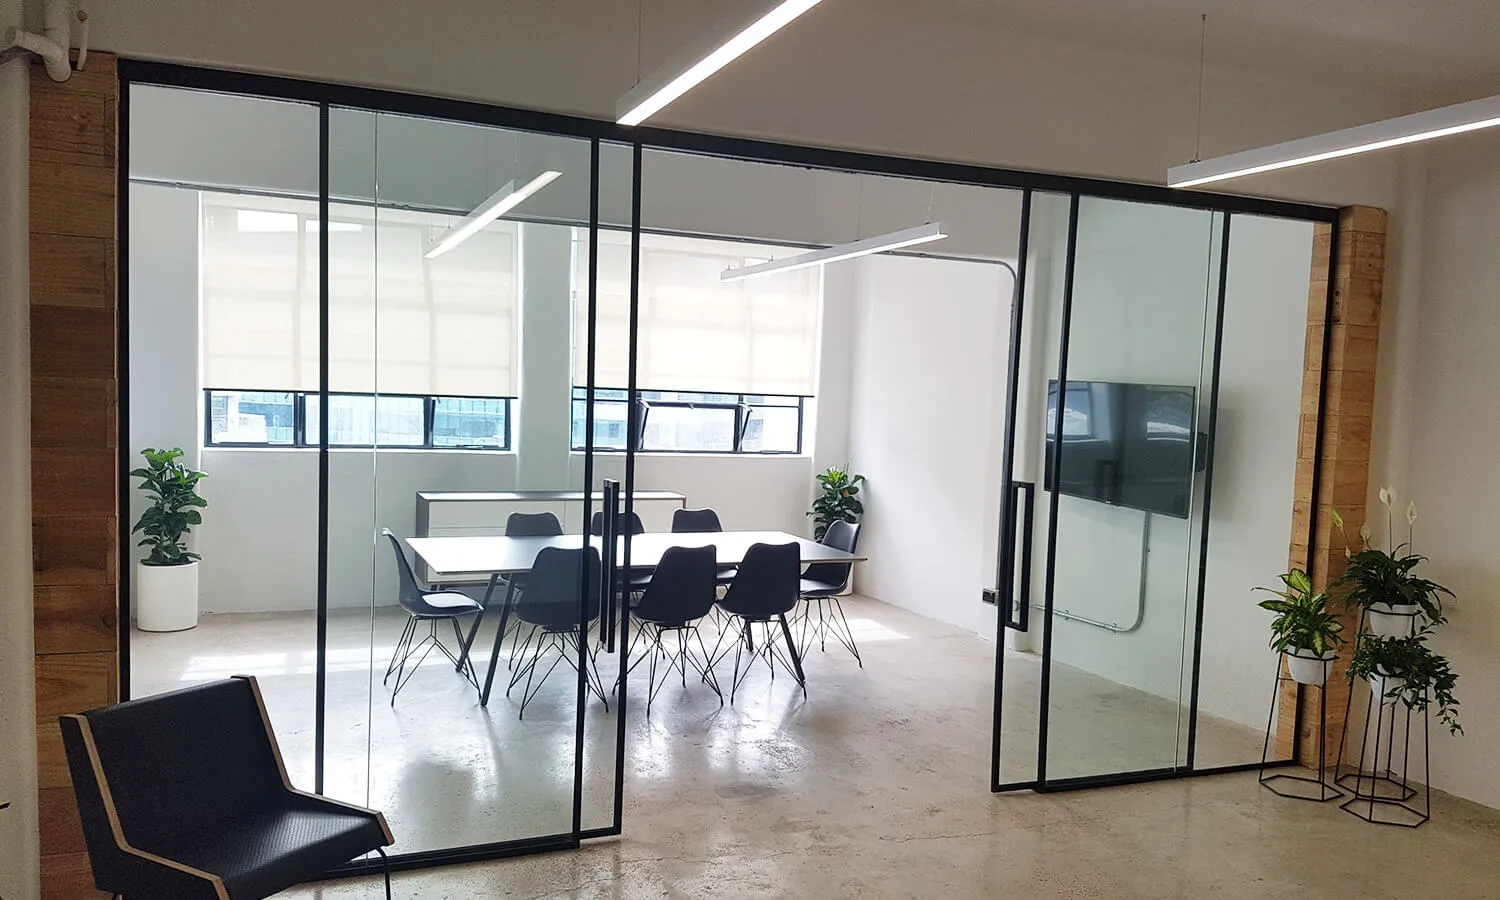 Meeting room with sliding glass doors